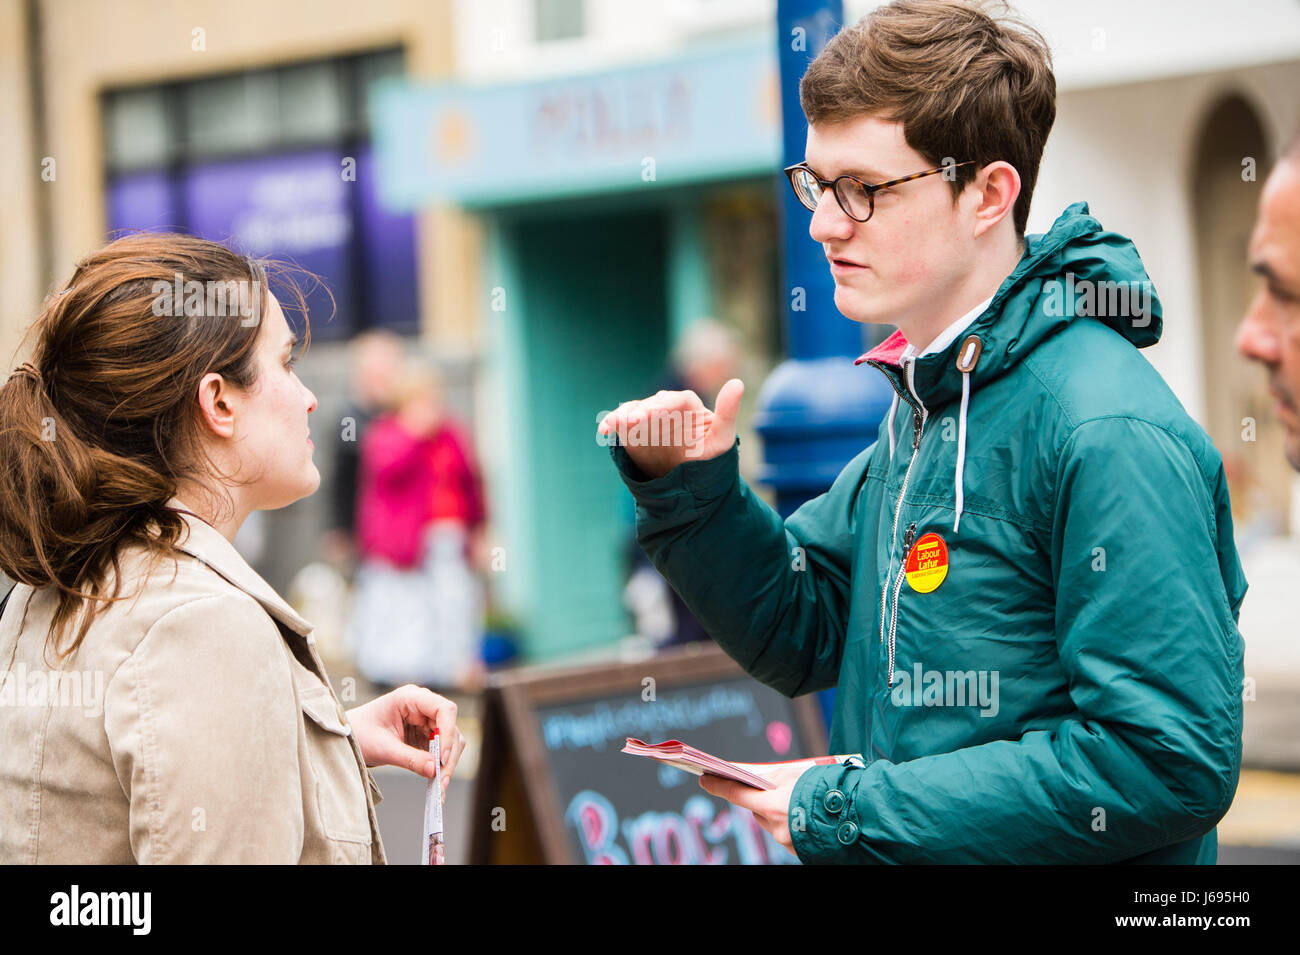 Aberystwyth Wales UK, Saturday 20 May 2017 General Election 2017 : Supporters the Labour Party all out canvassing for votes in Aberystwyth on Saturday 20 May 2017. The Ceredigion constituency is currently held by Mark Williams of the Lib Dems Photo credit: Credit: keith morris /Alamy Live News Stock Photo